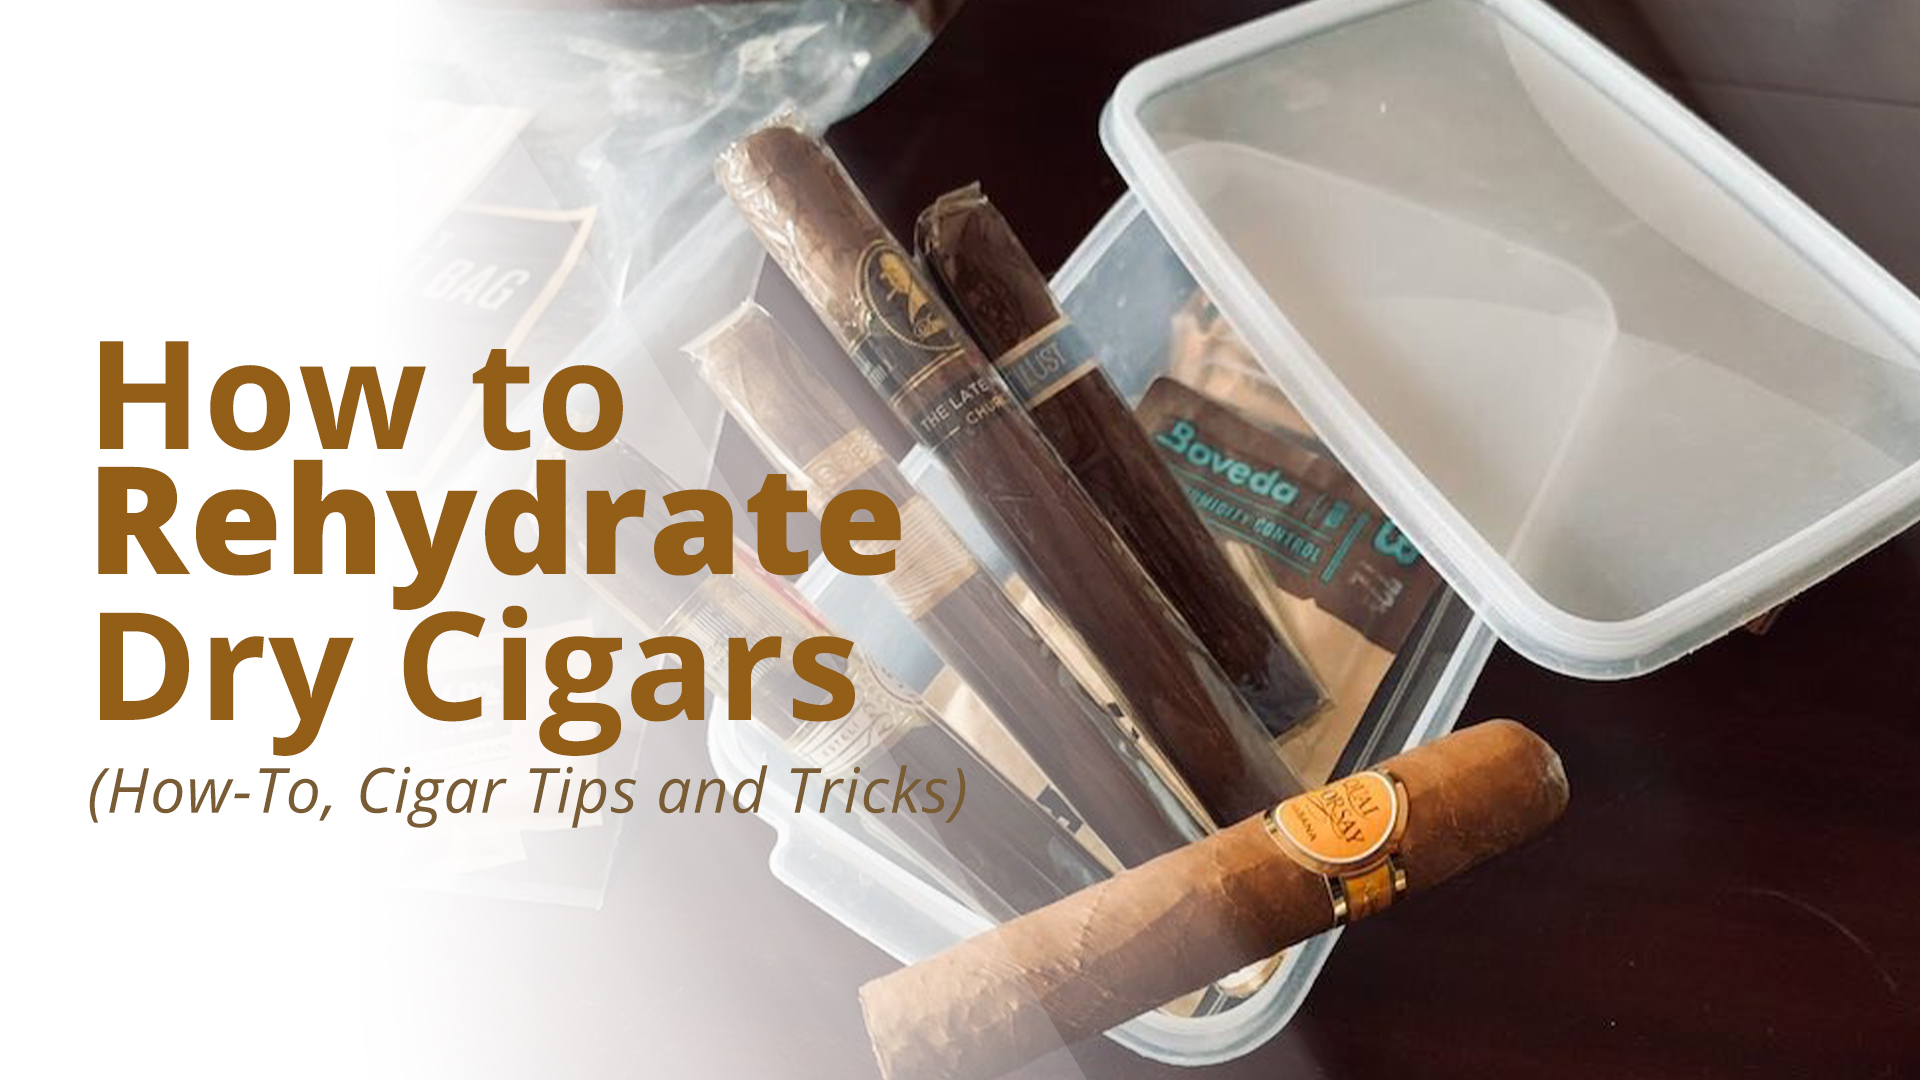 How to rehydrate dry cigars